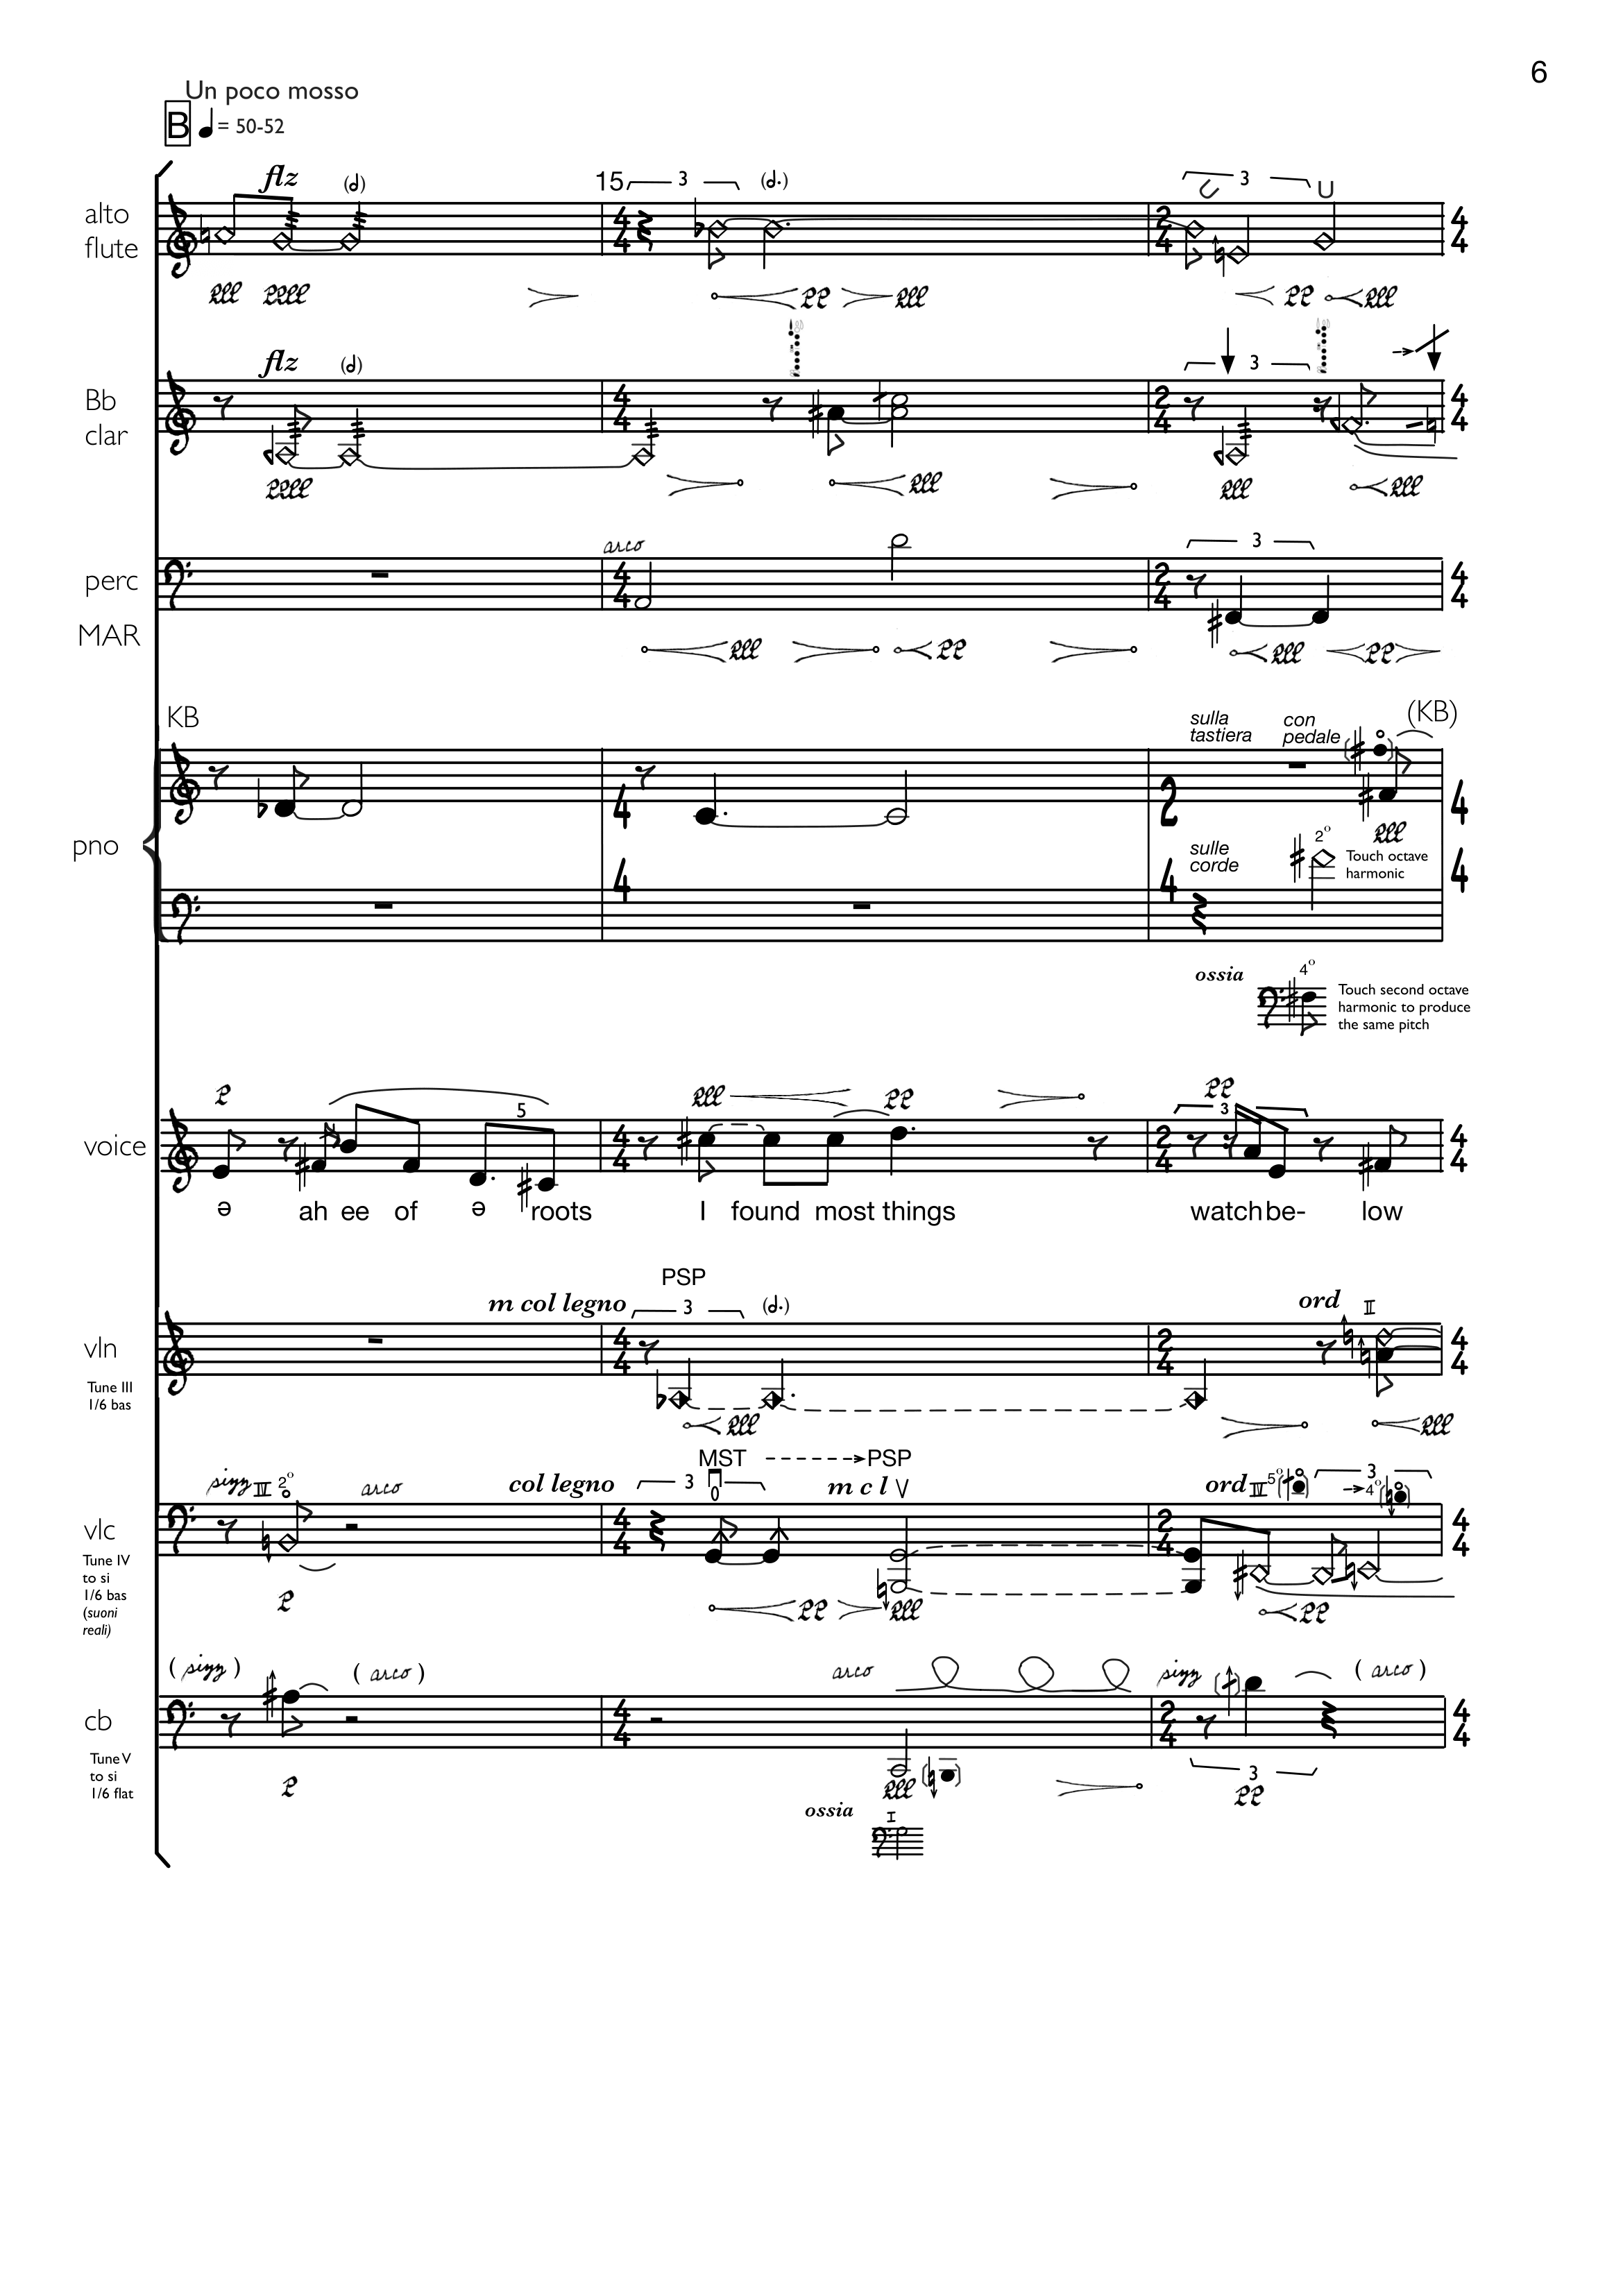 _AdasSong-score-2021version-06.png